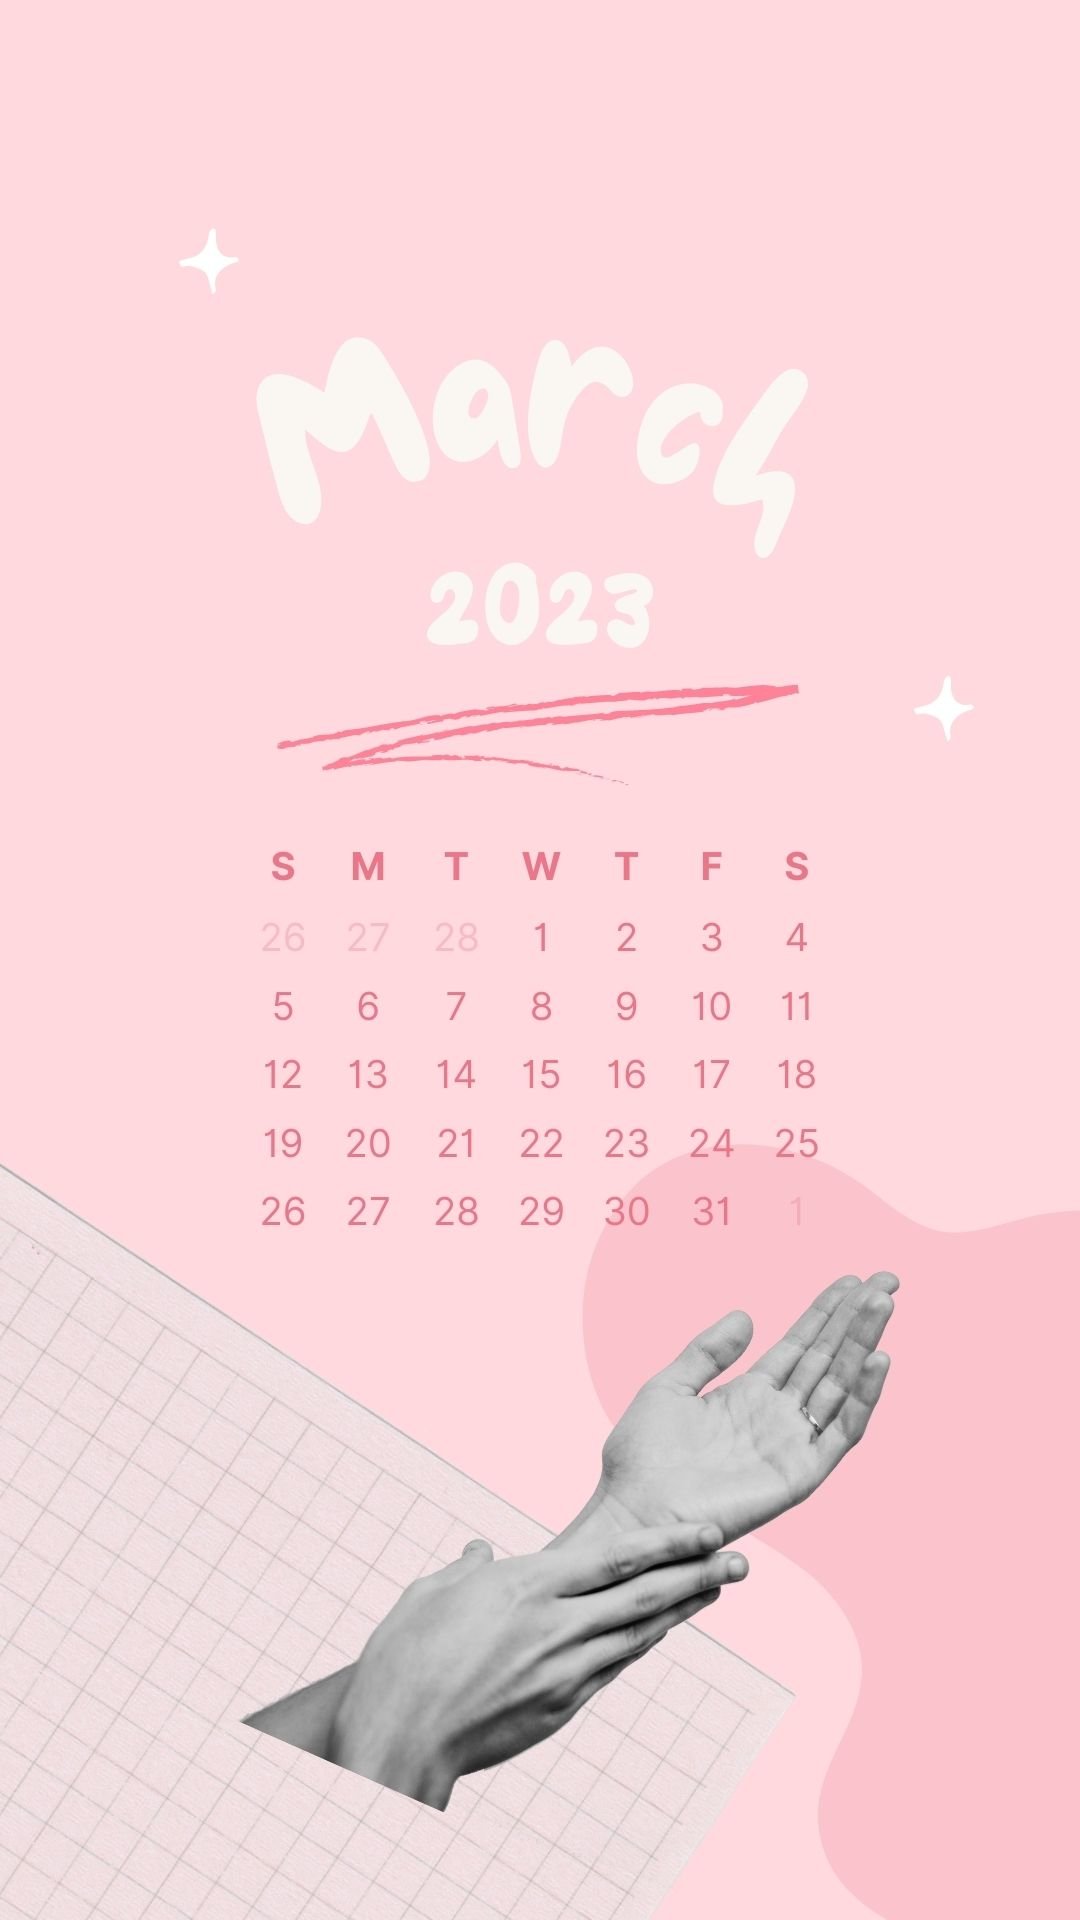 March 2023 free aesthetic calendar wallpaper / lock screen background for your phone ⋆ The Aesthetic Shop